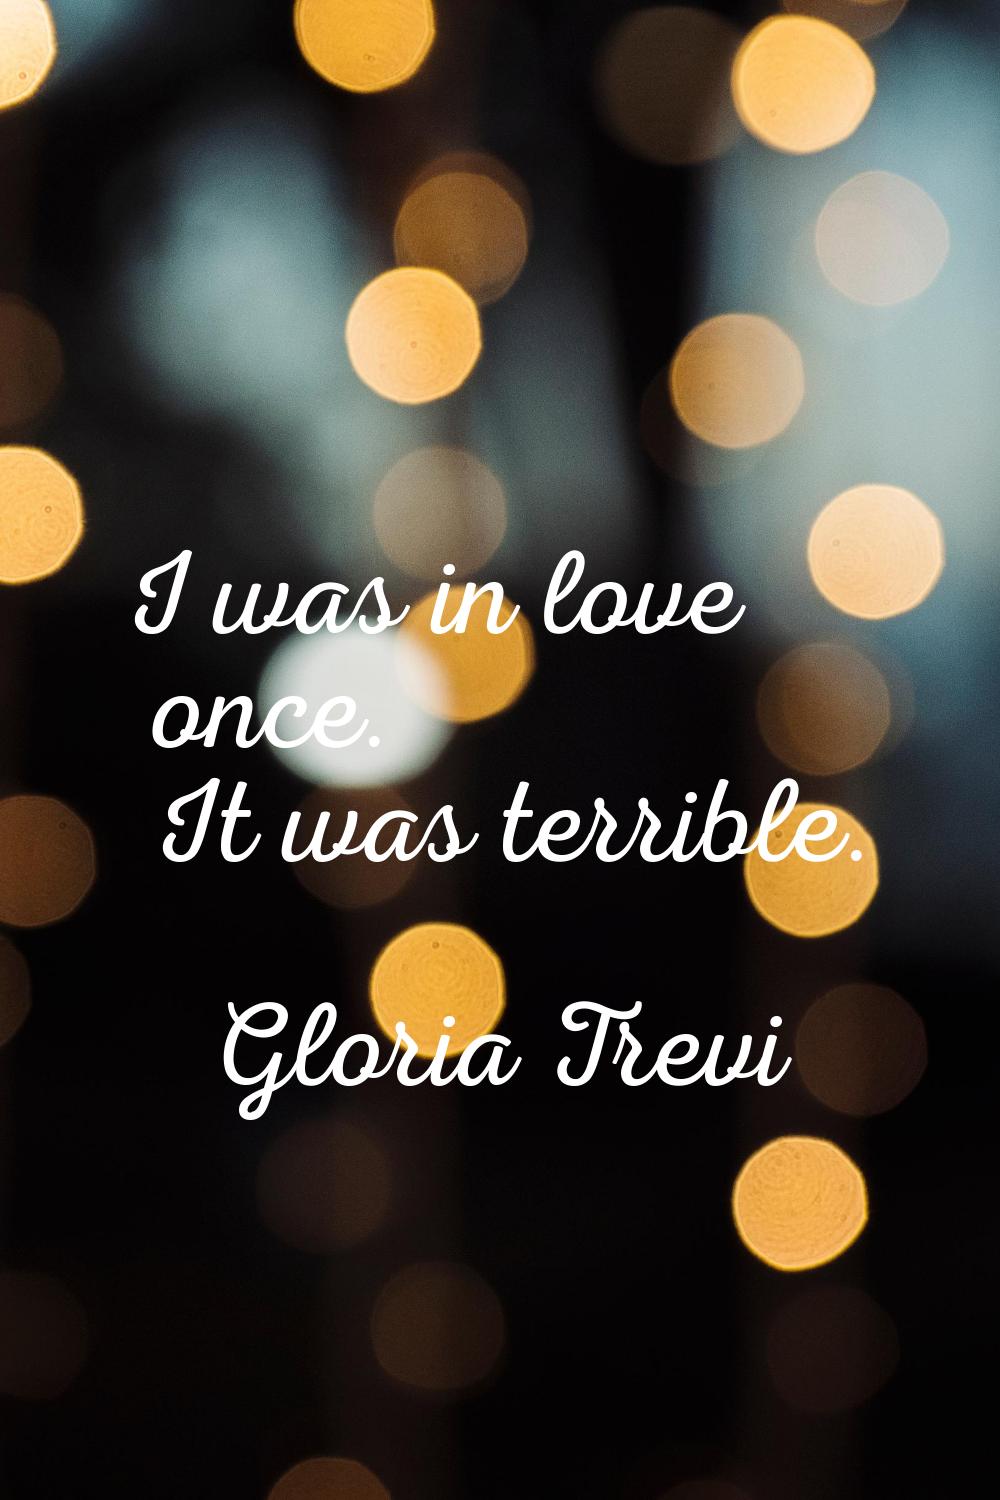 I was in love once. It was terrible.